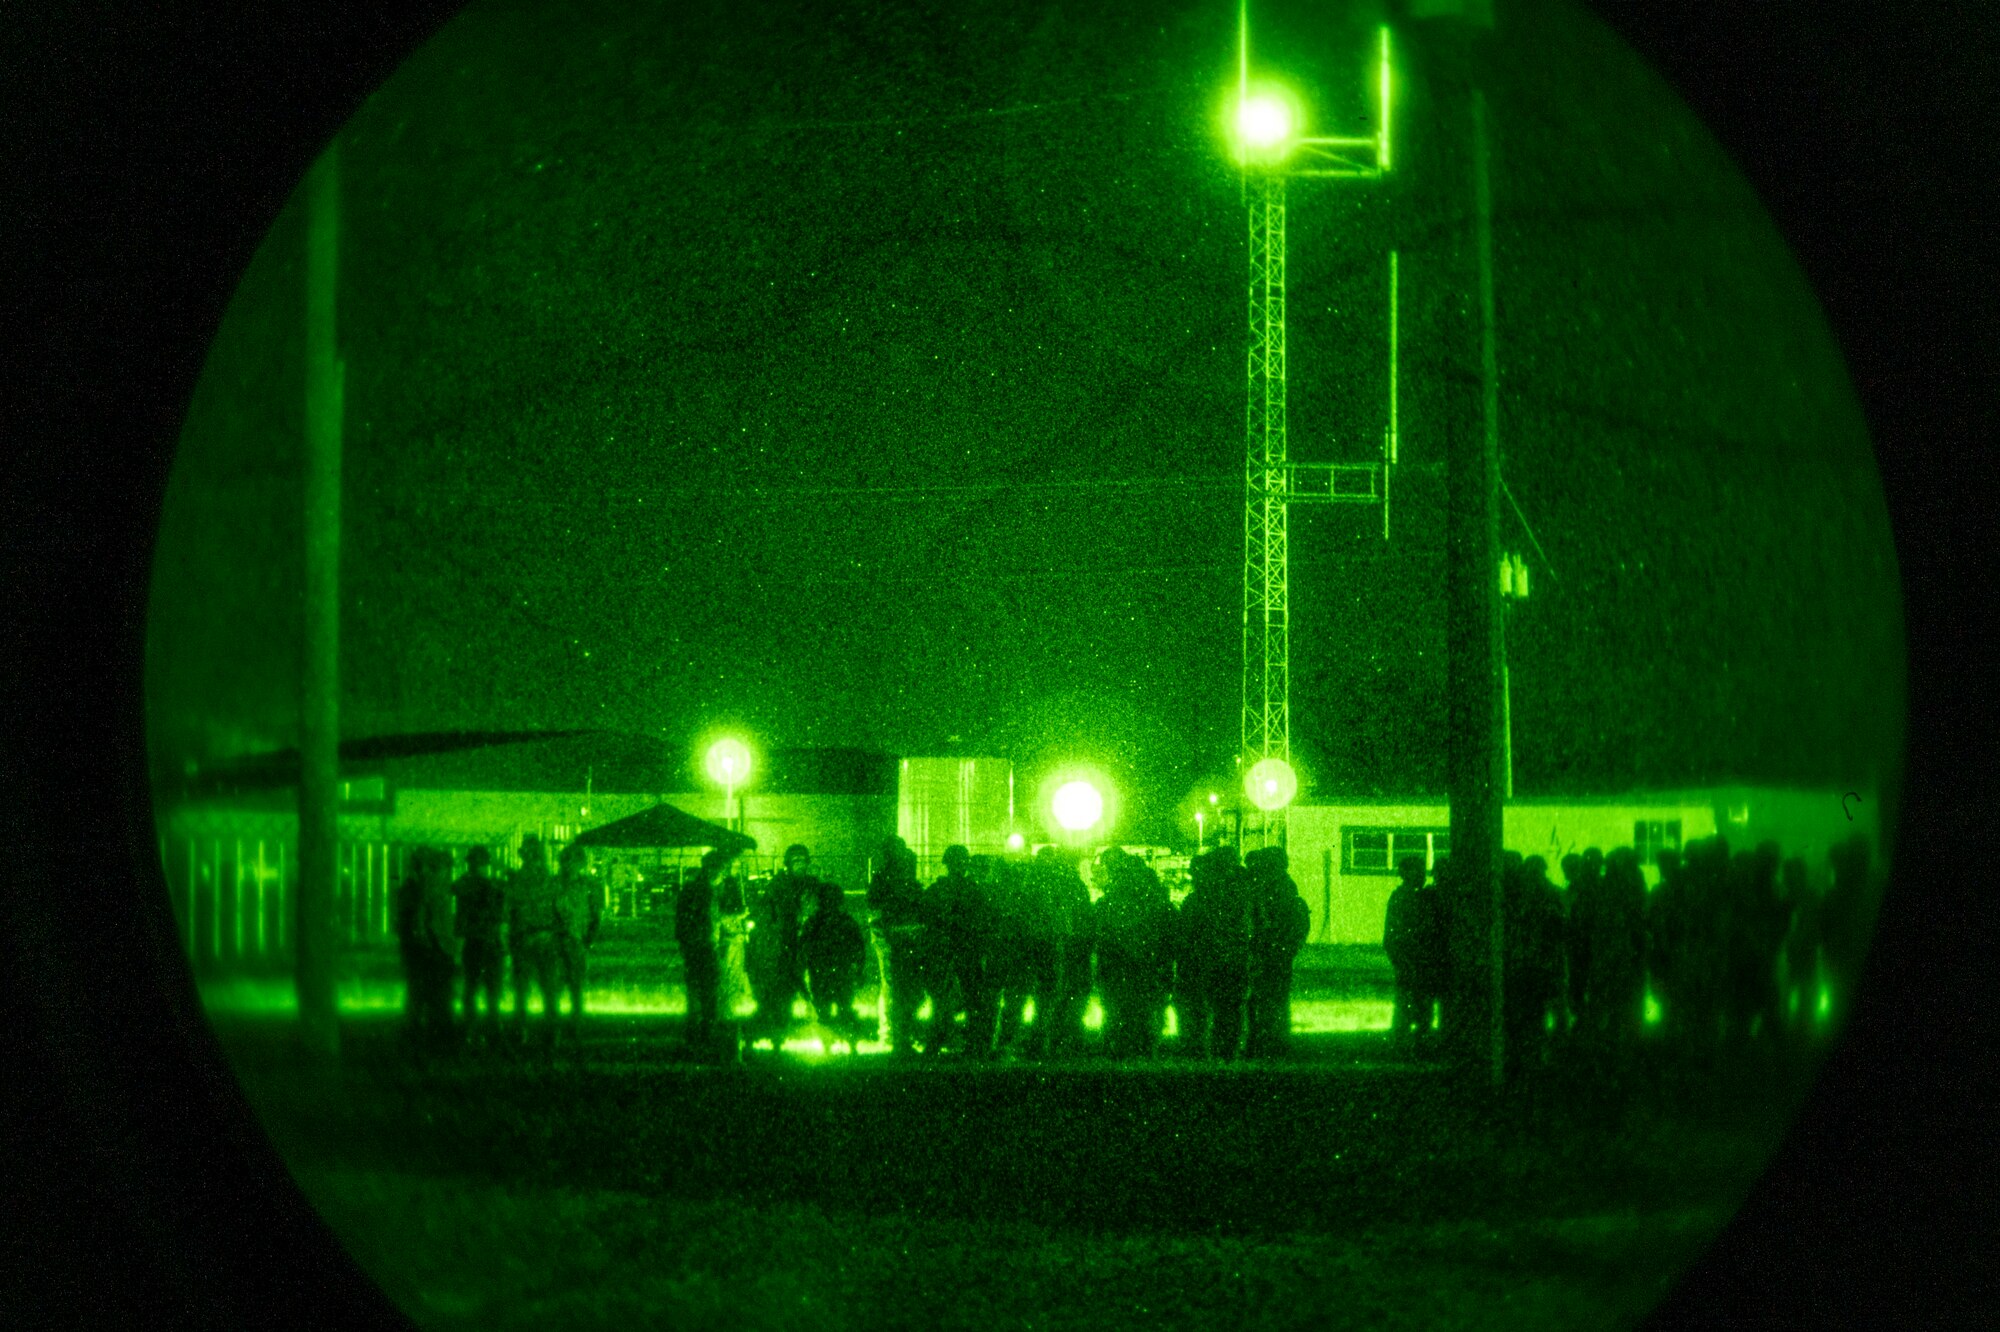 U.S. Air Force Airmen assigned to the 23rd Wing stand outside during Exercise Ready Tiger 24-1 at Avon Park Air Force Range, Florida, April 14, 2024. Exercise participants had to respond to simulated base attacks as well as air strikes to practice Agile Combat Employment concepts. Ready Tiger 24-1 is a readiness exercise demonstrating the 23rd Wing’s ability to plan, prepare and execute operations and maintenance to project air power in contested and dispersed locations, defending the United States’ interests and allies. (U.S. Air Force photo by Airman 1st Class Leonid Soubbotine)